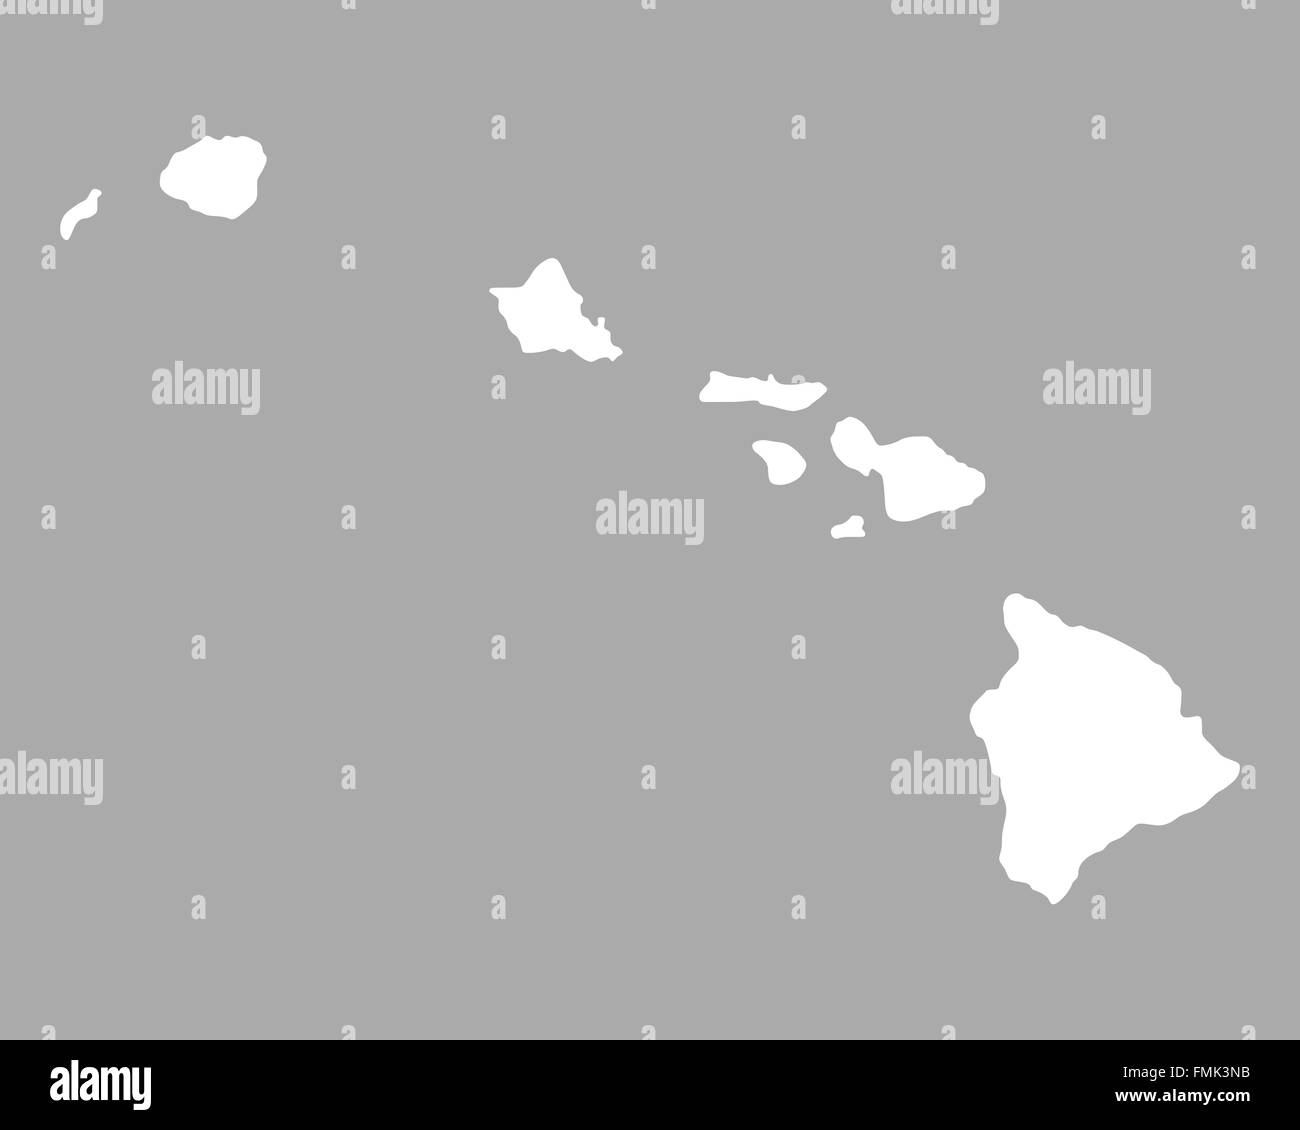 Hawaii map Black and White Stock Photos & Images - Alamy